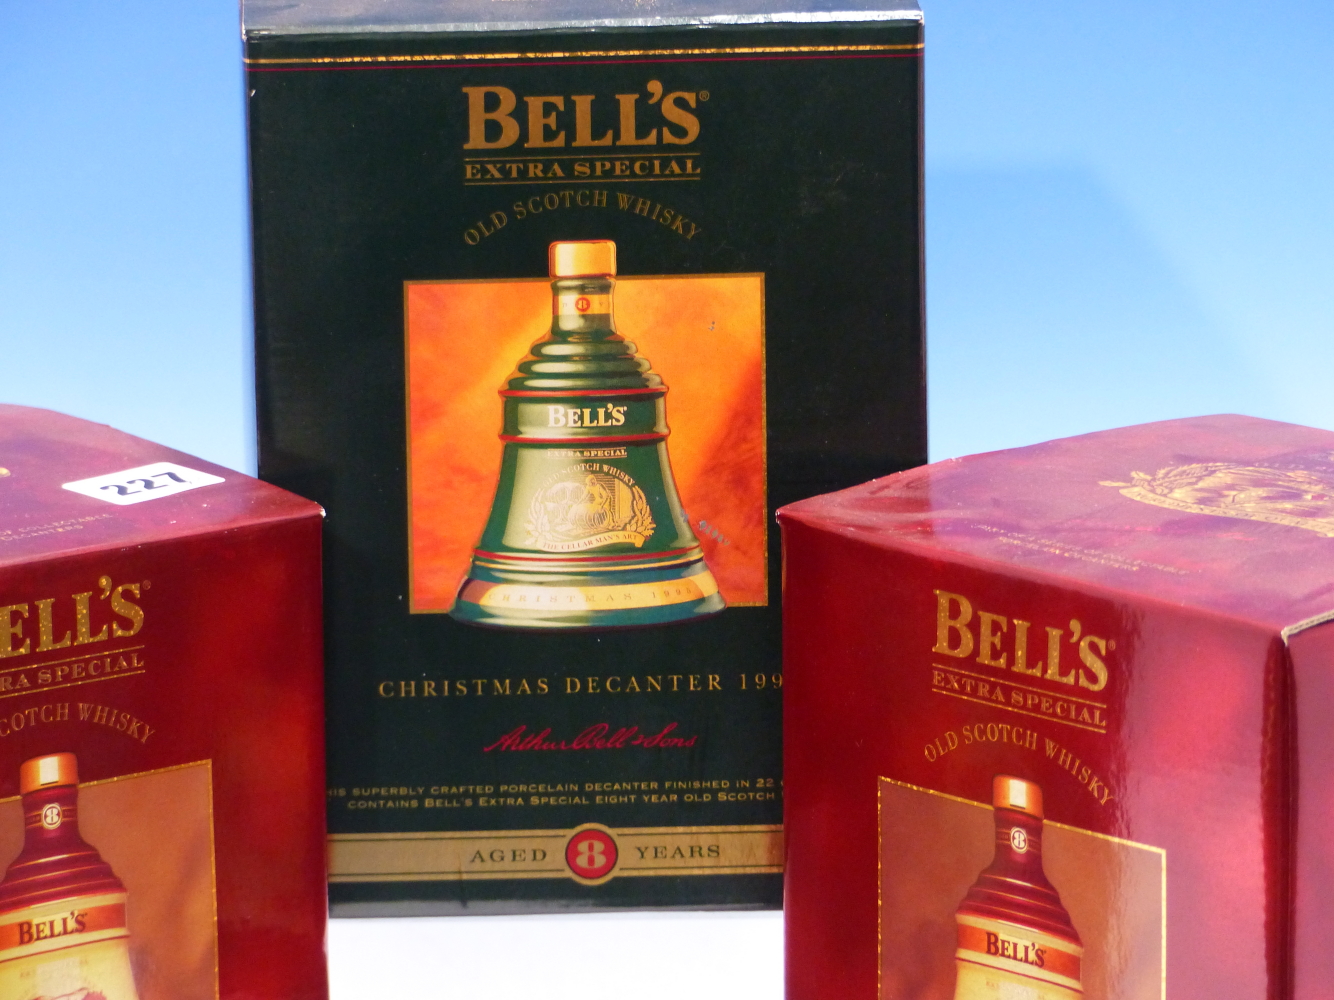 WHISKY. BELLS CHRISTMAS DECANTER 1996 EDITION, 2 x BOTTLES, BOXED TOGETHER WITH 1995, 1 x BOTTLE, - Image 3 of 4